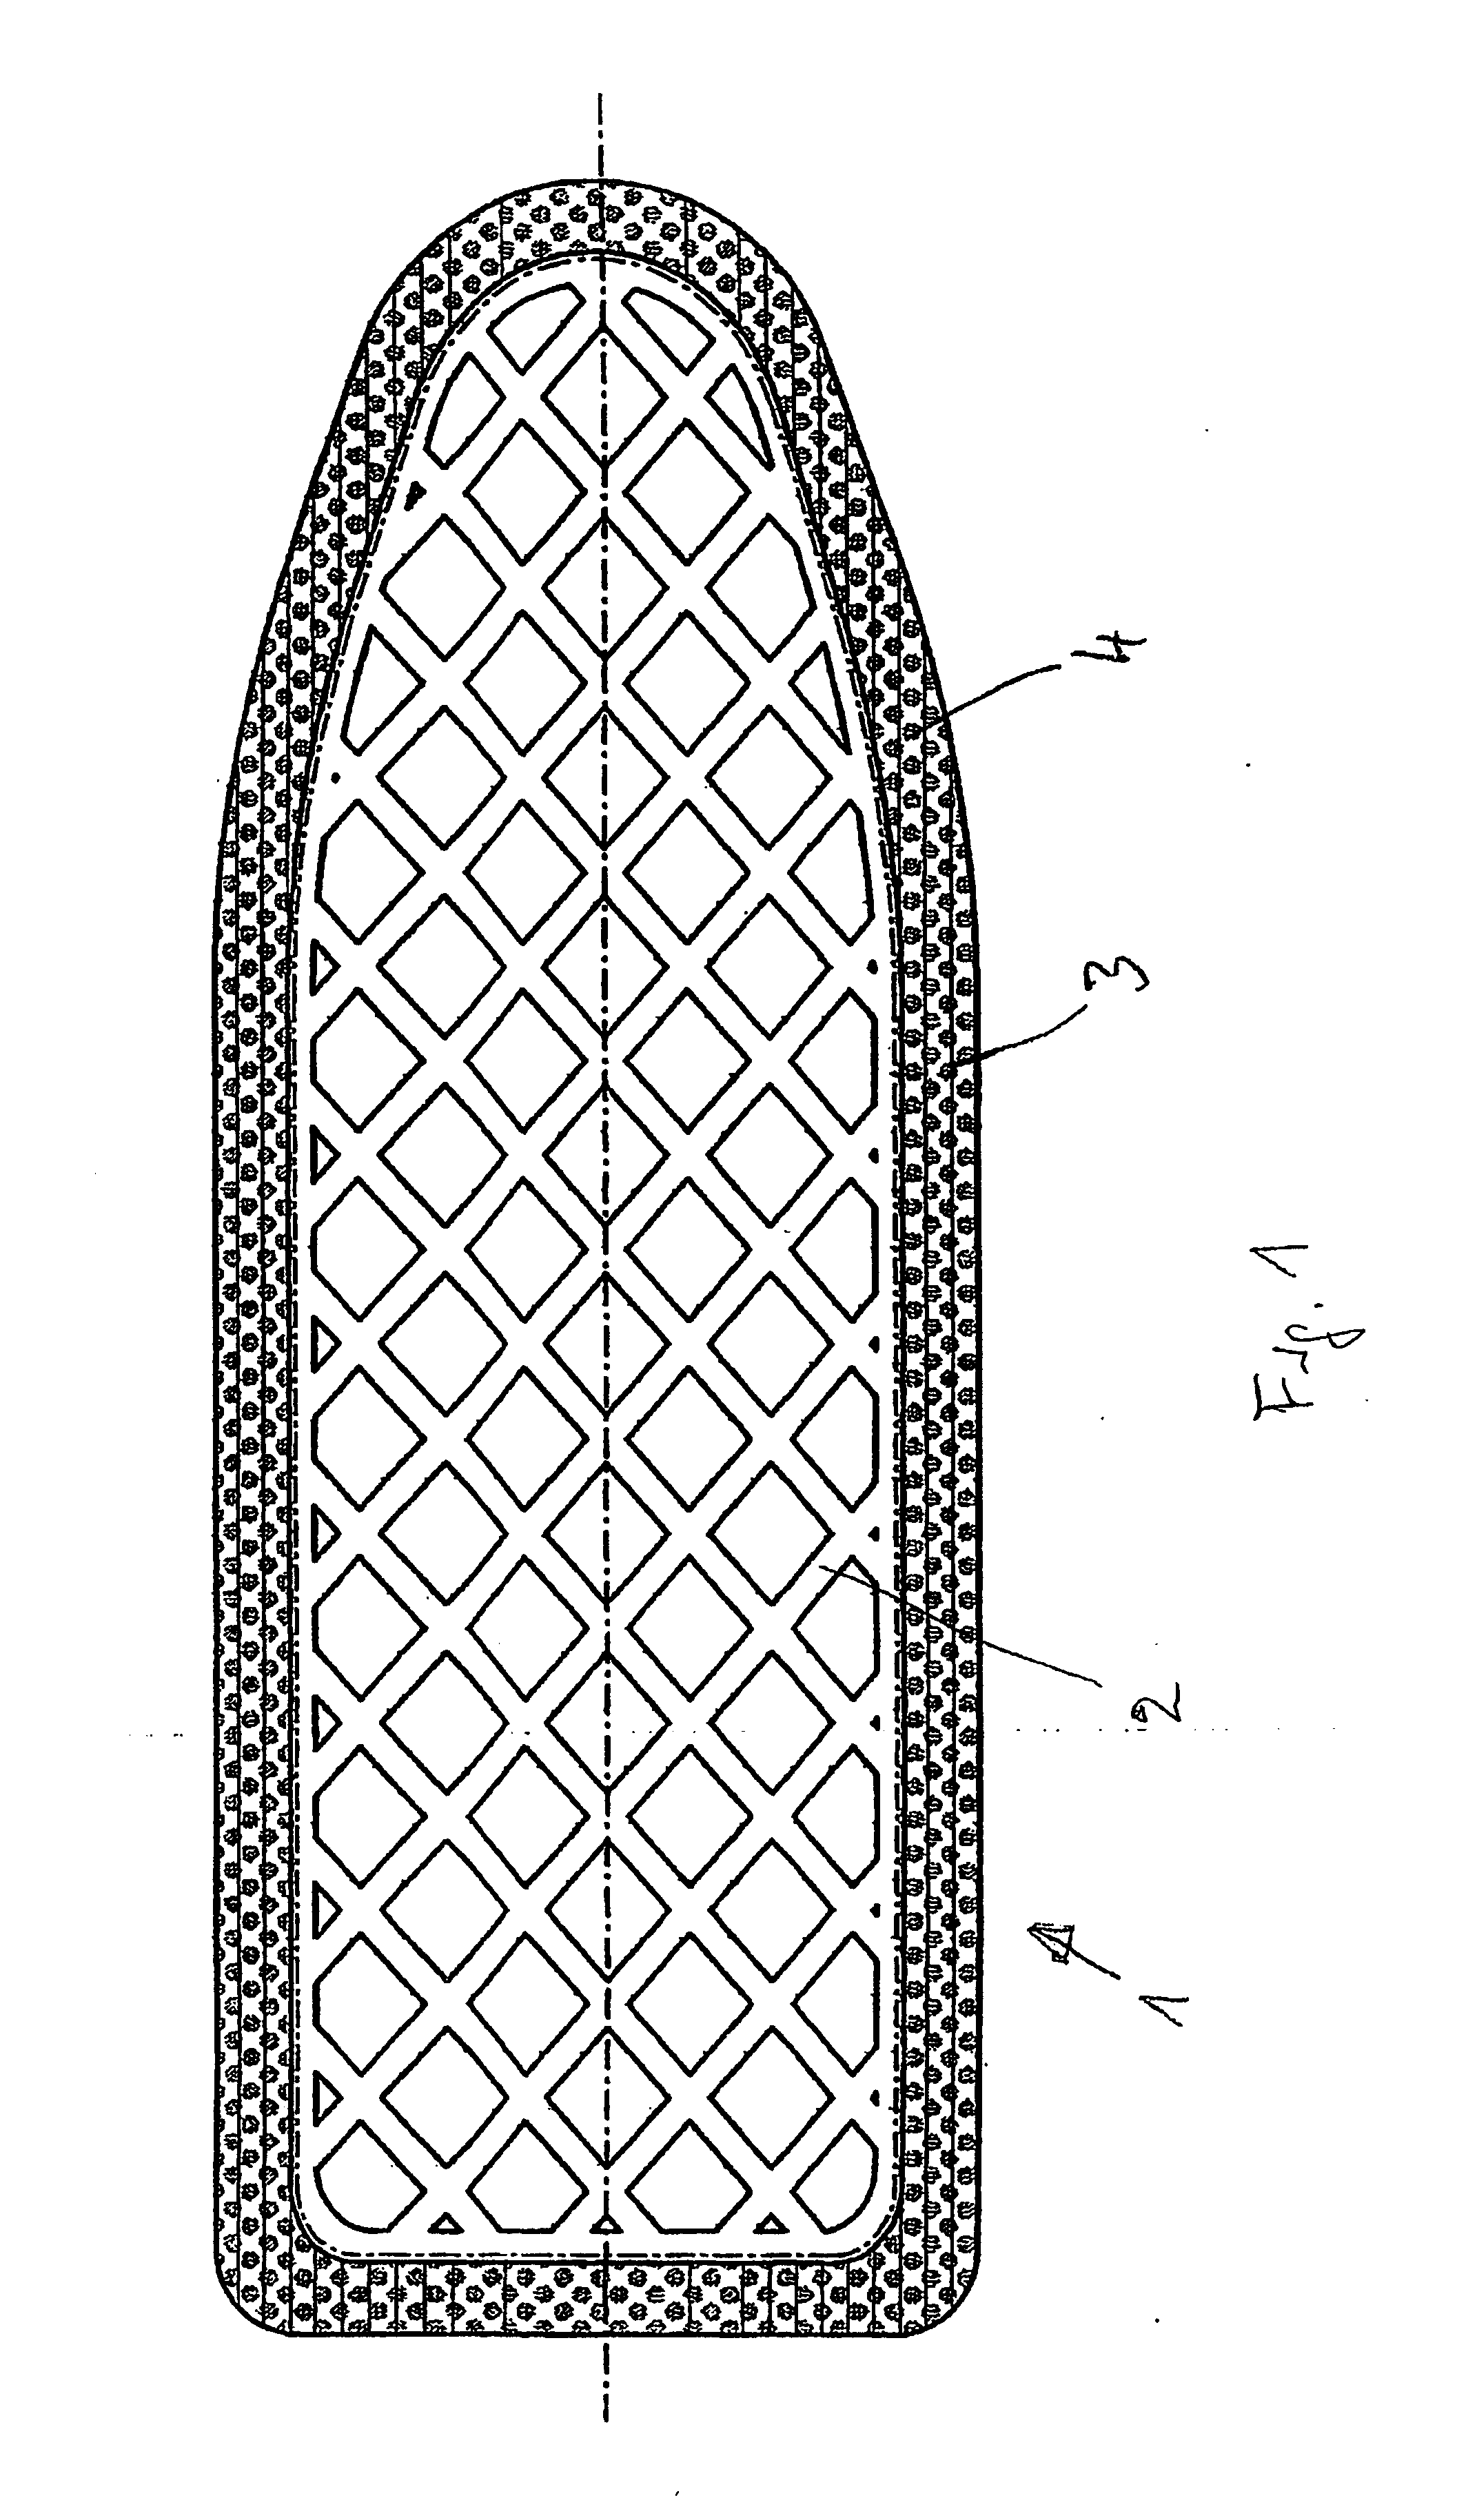 Heat-resistant ironing board cover having an elastic padding